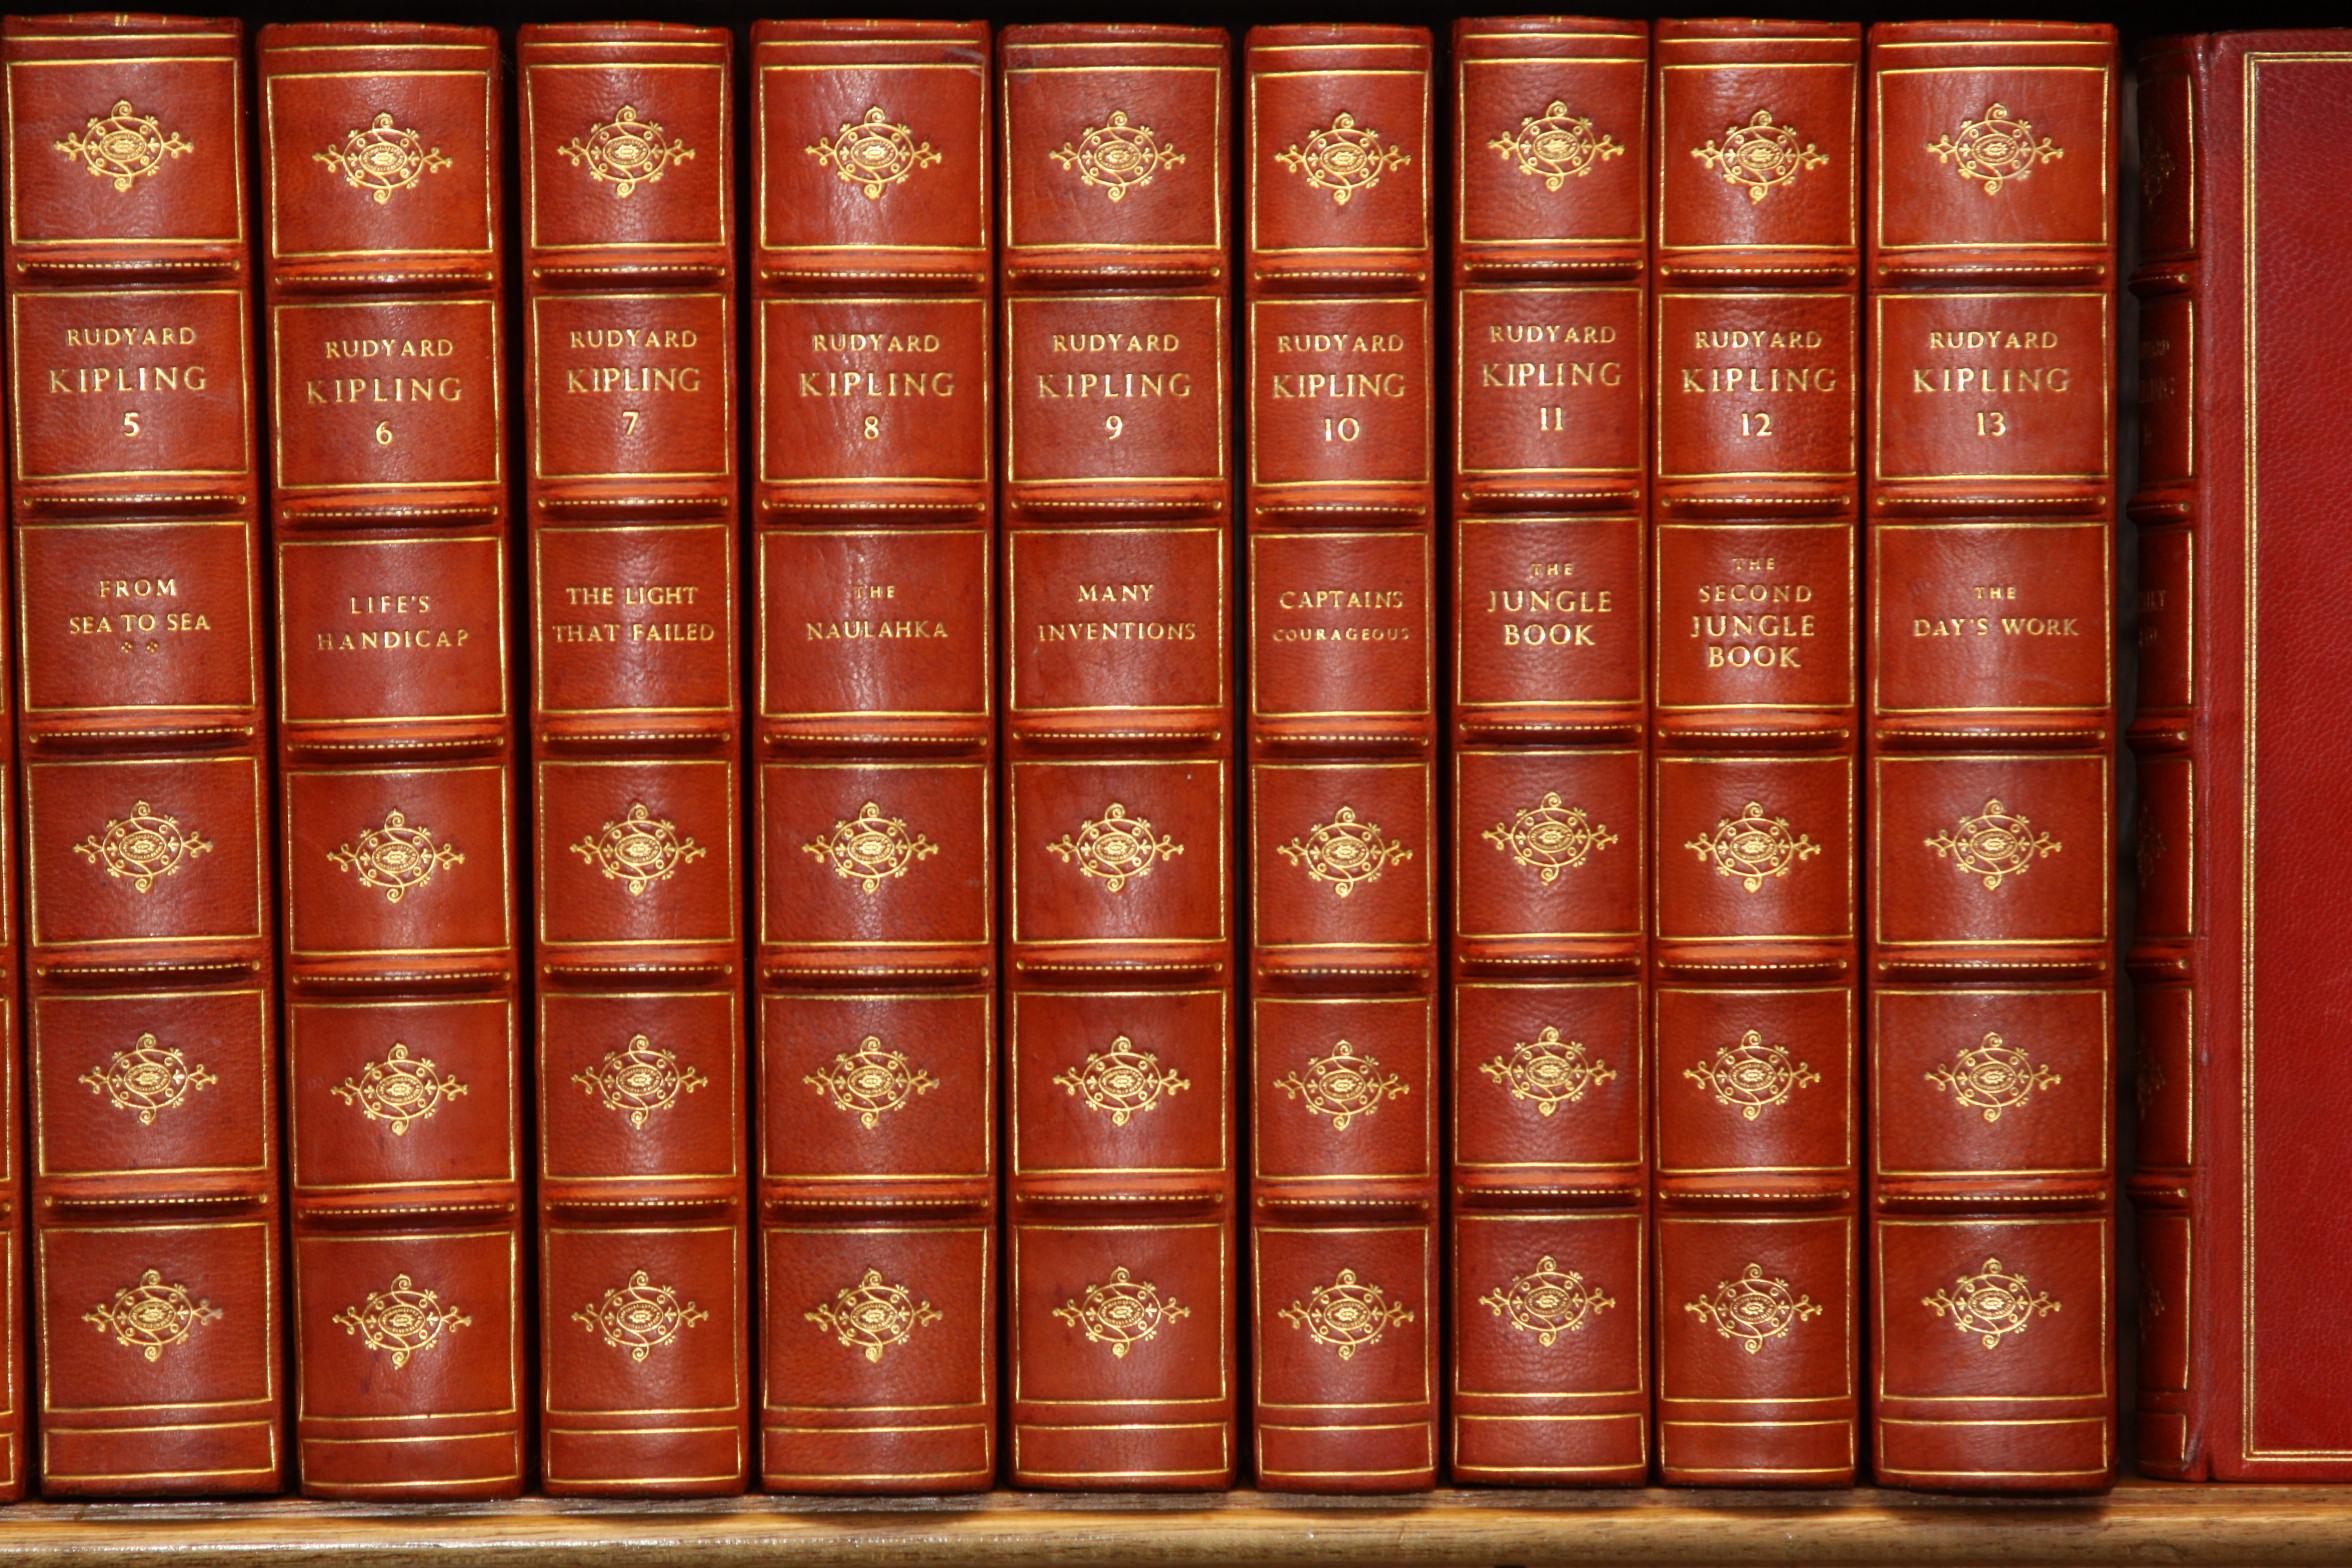 Dyed Books the Writings of Rudyard Kipling, the Bombay Edition Collected Antiques Set